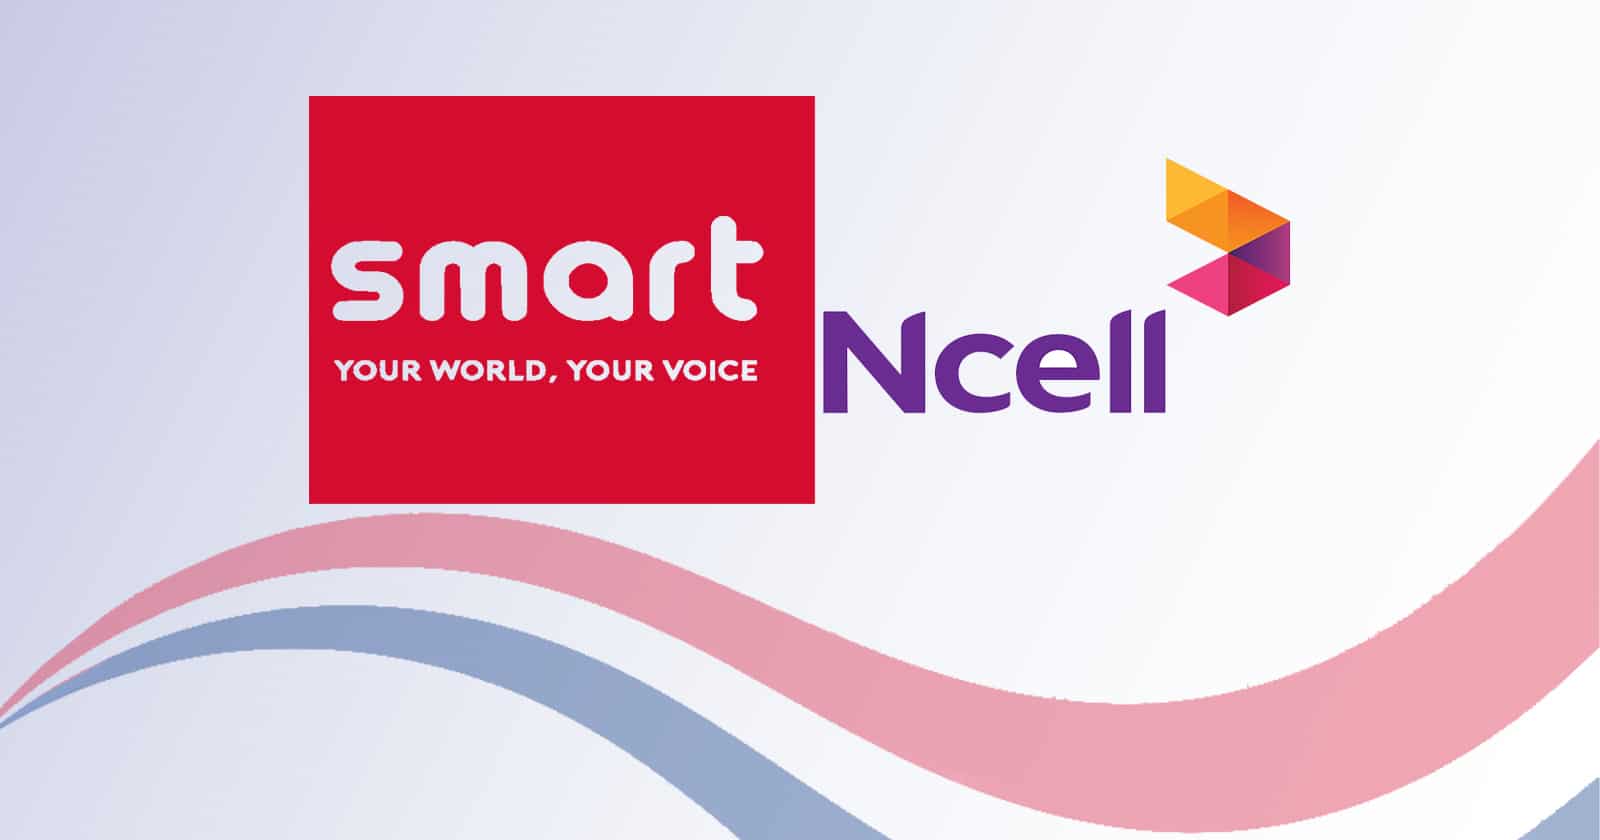 The initiative to transfer the validity and frequency of Smart Telecom's services to Ncell has been unsuccessful